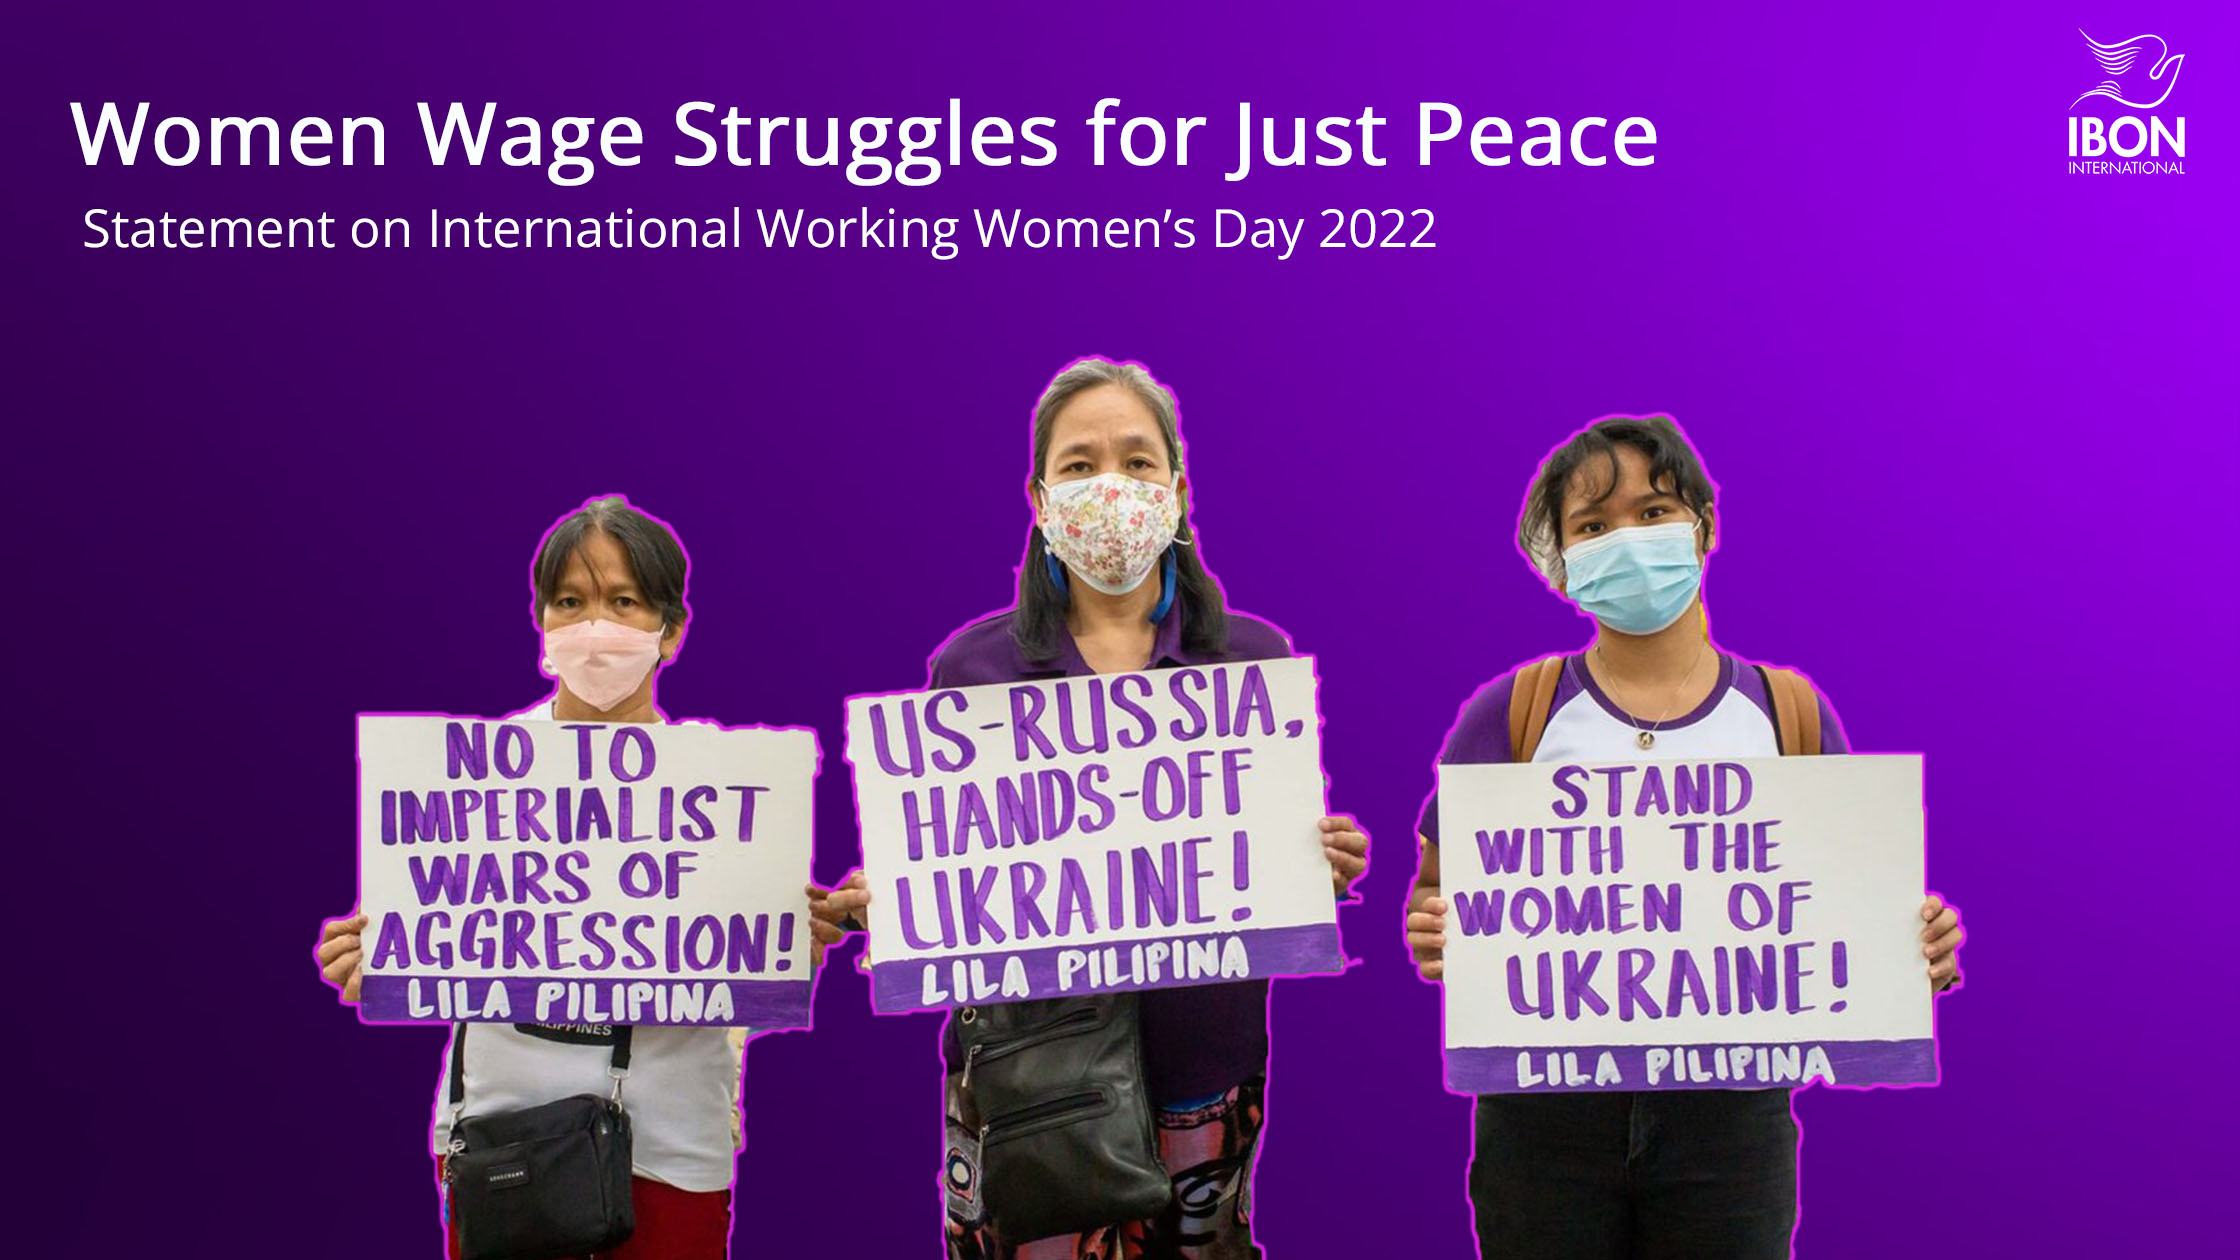 Women wage struggles for just peace